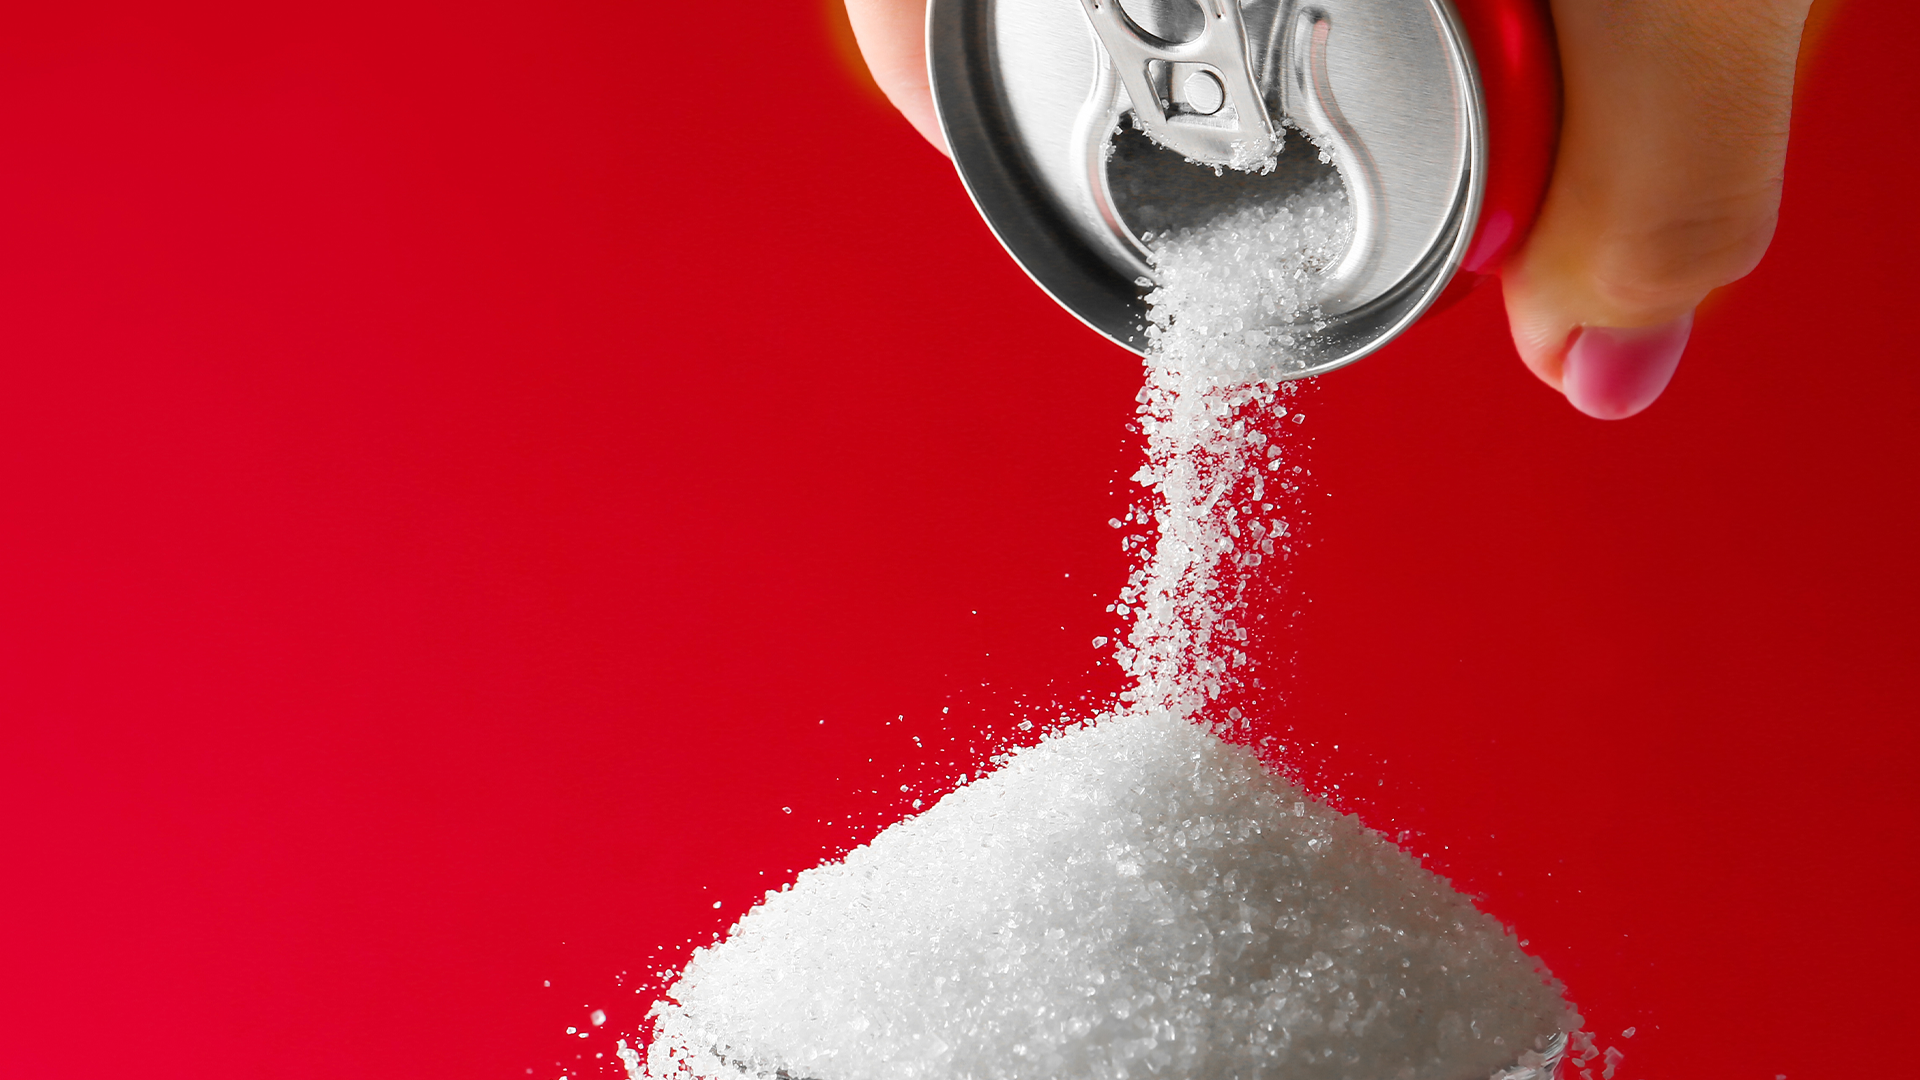 Is diet soda good for weight loss?